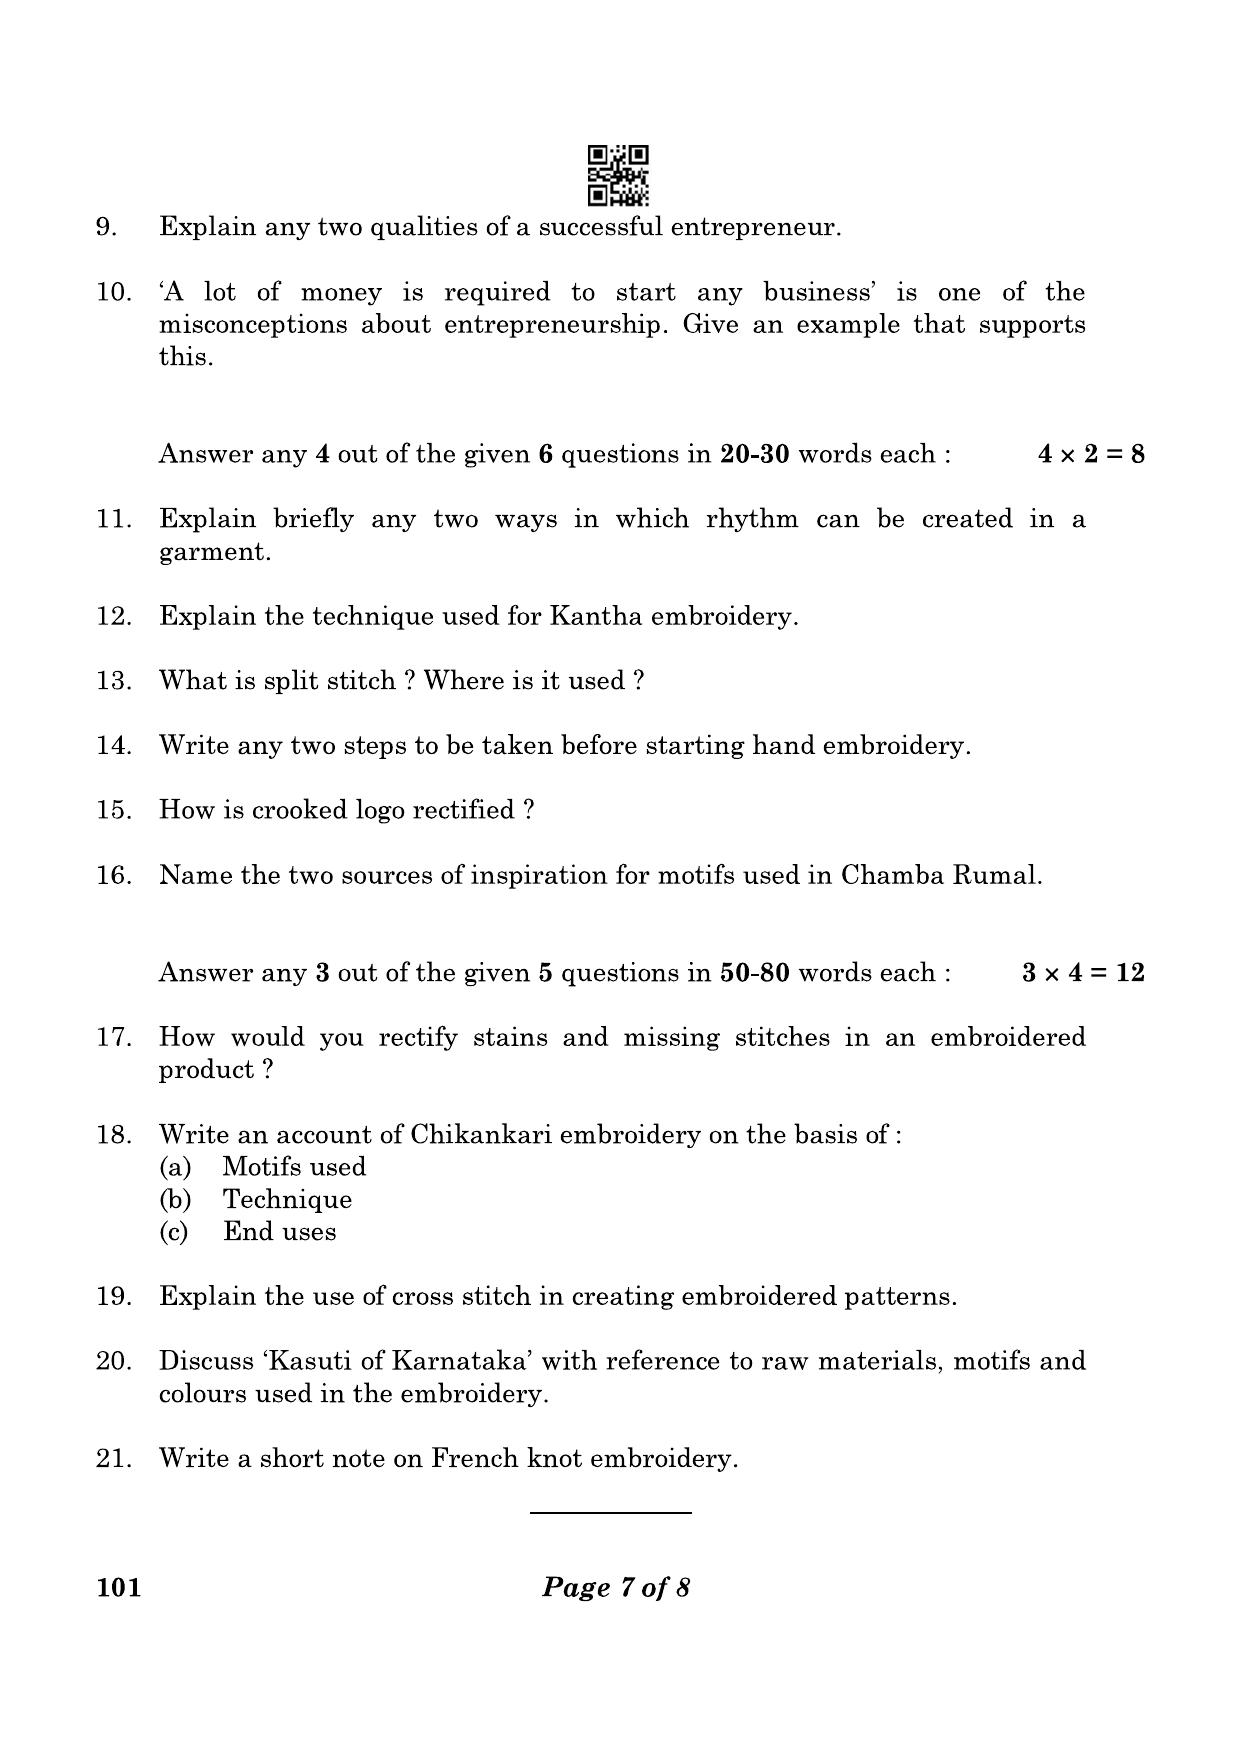 CBSE Class 10 101 Apparel 2023 Question Paper - Page 7